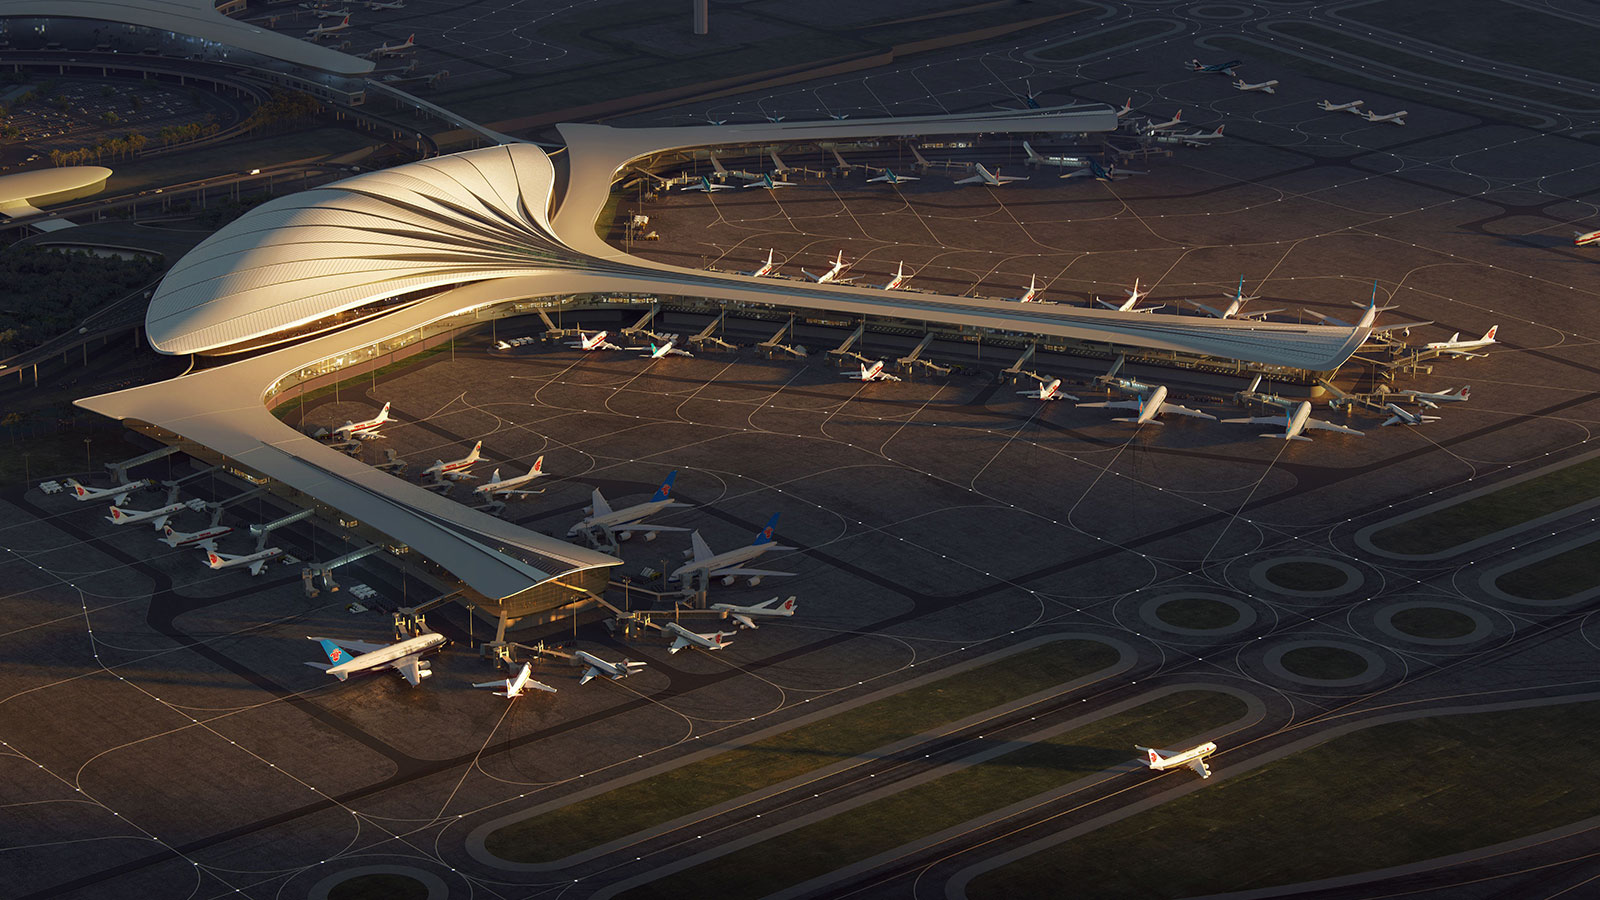 "Changchun Airport T3 MAD Architects indiaartndesign"